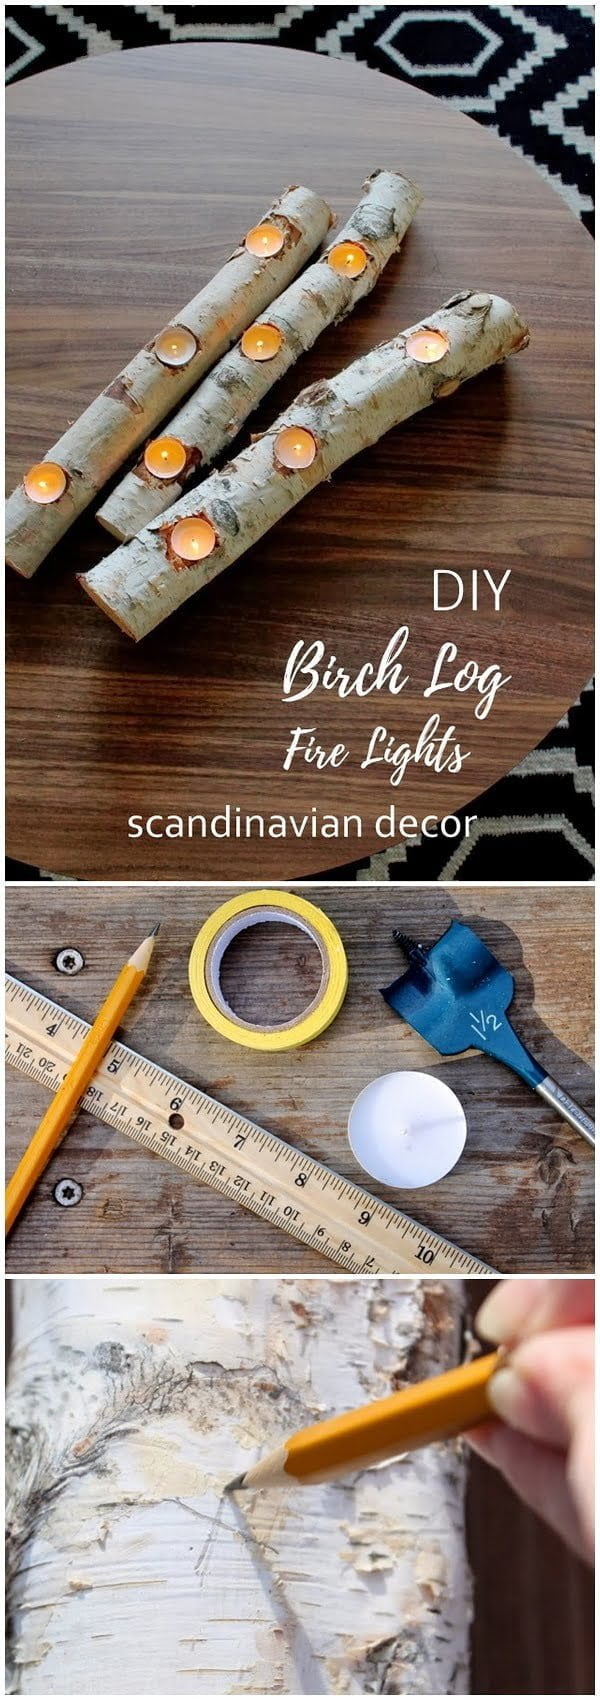 How to make  birch log fire lights for easy  style    